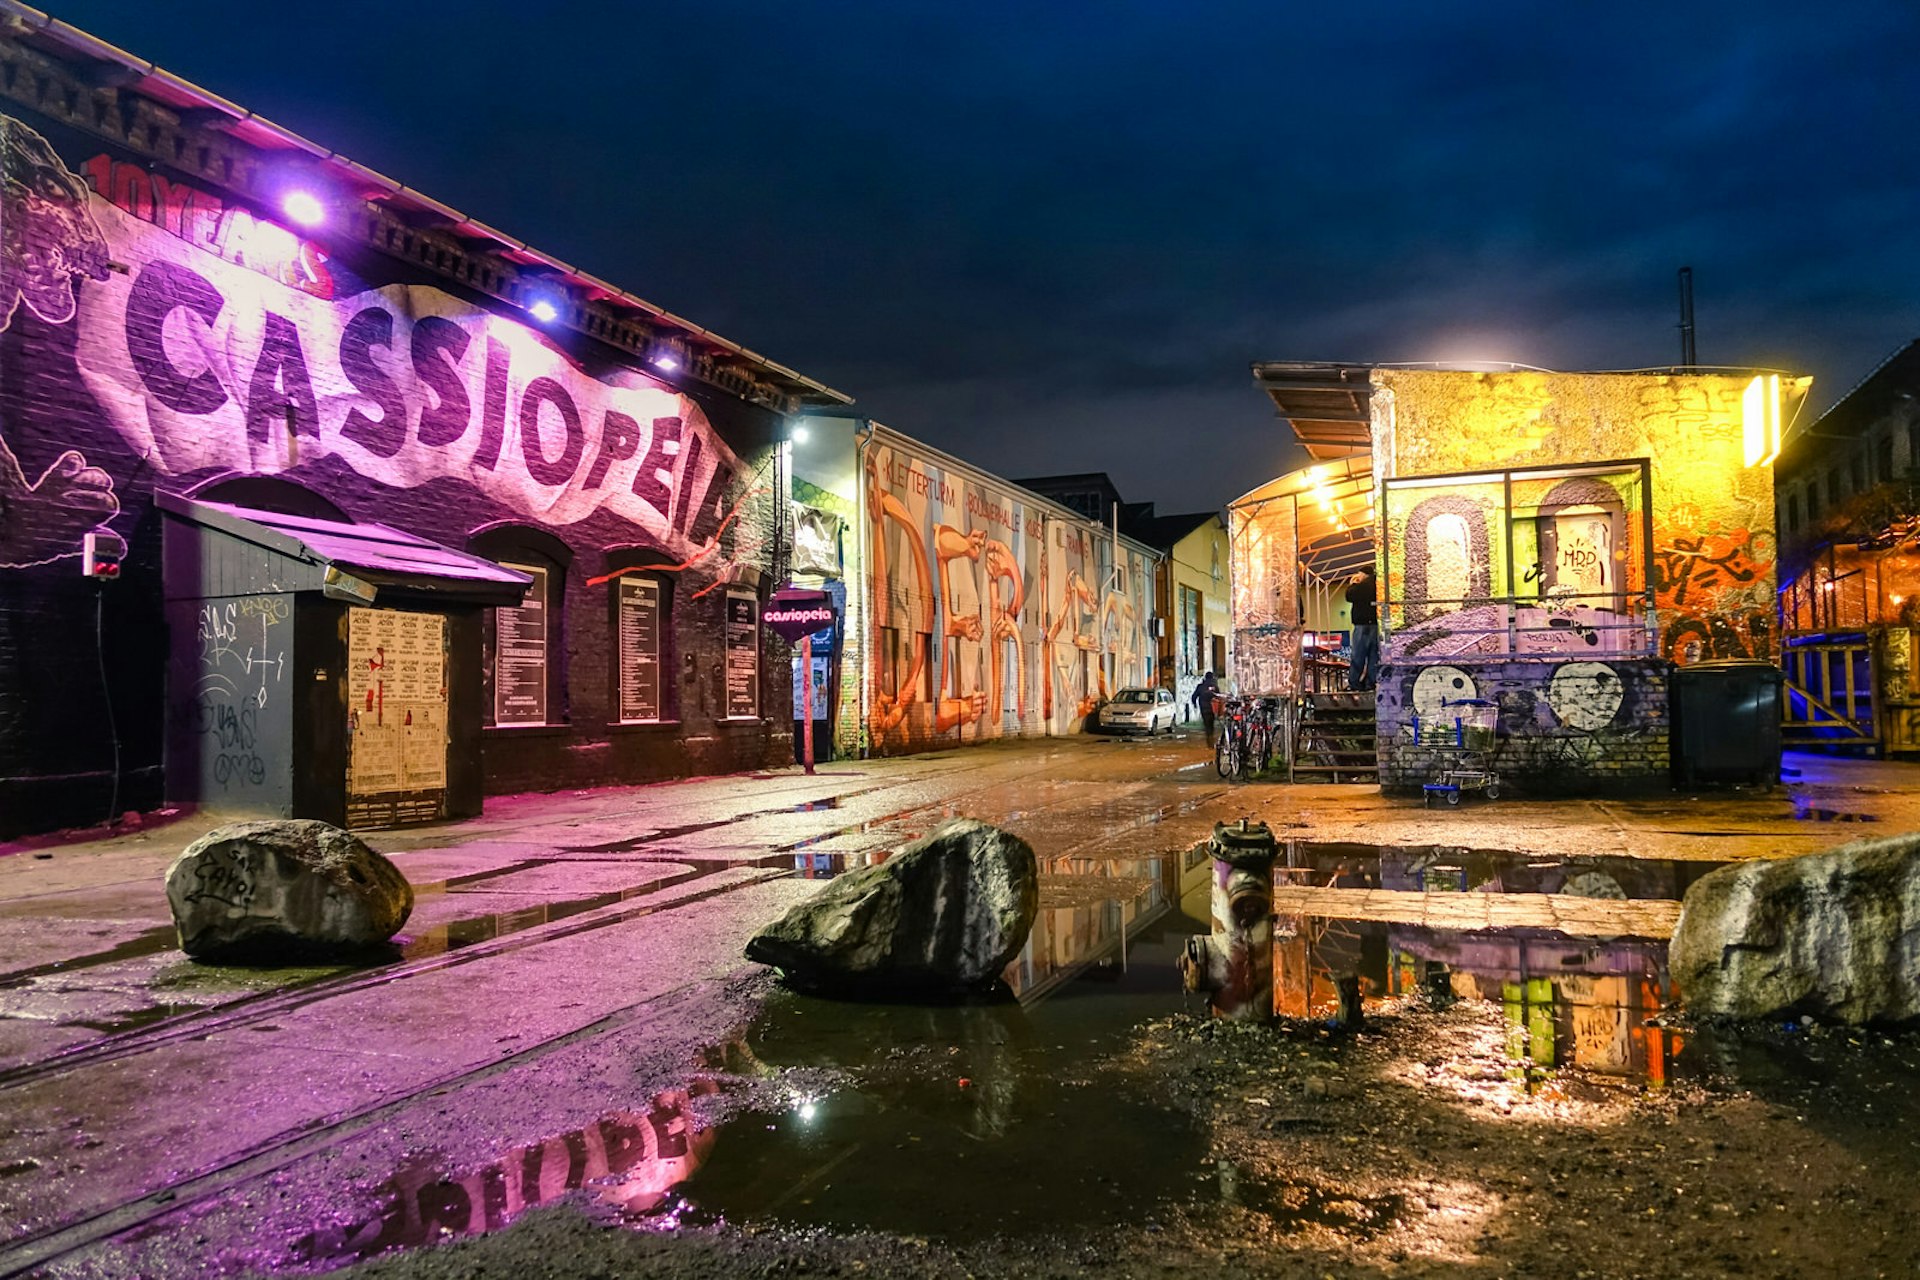 Berlin clubs - the main yard at RAW Gelände at night time. The buildings are illuminated by multicoloured lights and the club Cassiopeia has a huge mural of its name along the side of the building